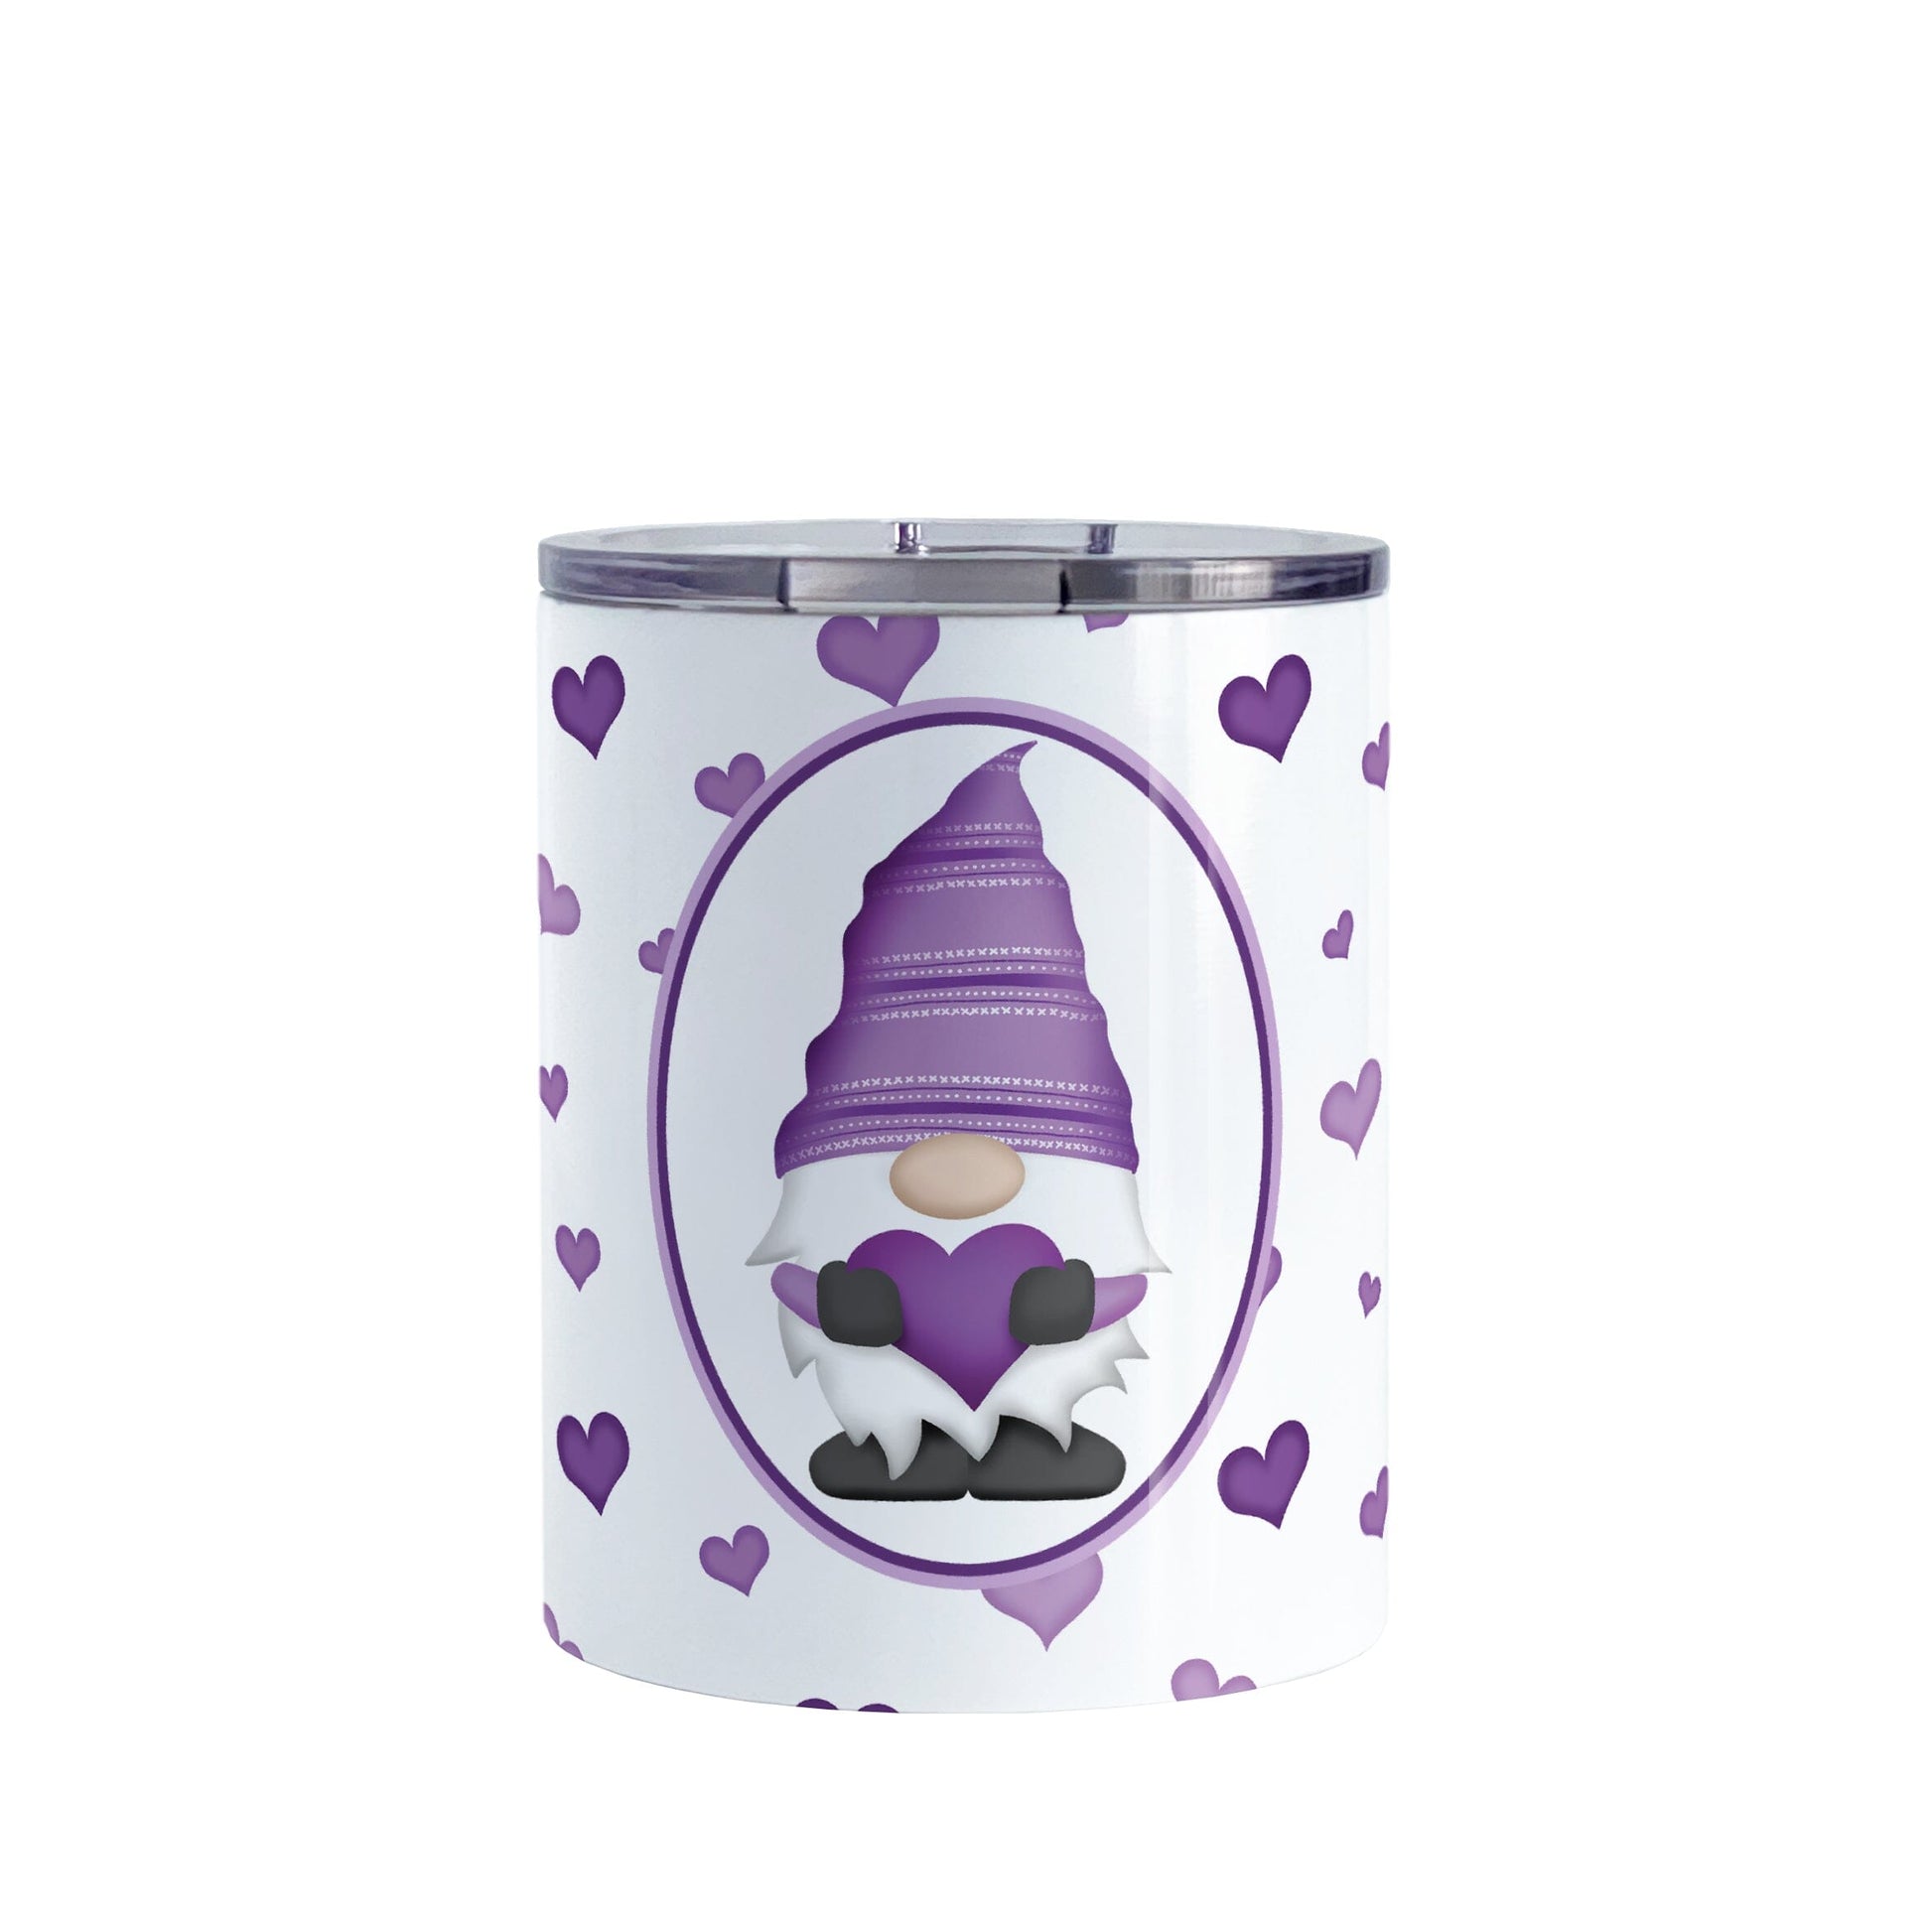 Purple Gnome Dainty Hearts Tumbler Cup (10oz) at Amy's Coffee Mugs. A stainless steel tumbler cup designed with an adorable purple gnome holding a heart in a white oval over a pattern of cute and dainty hearts in different shades of purple that wrap around the cup.